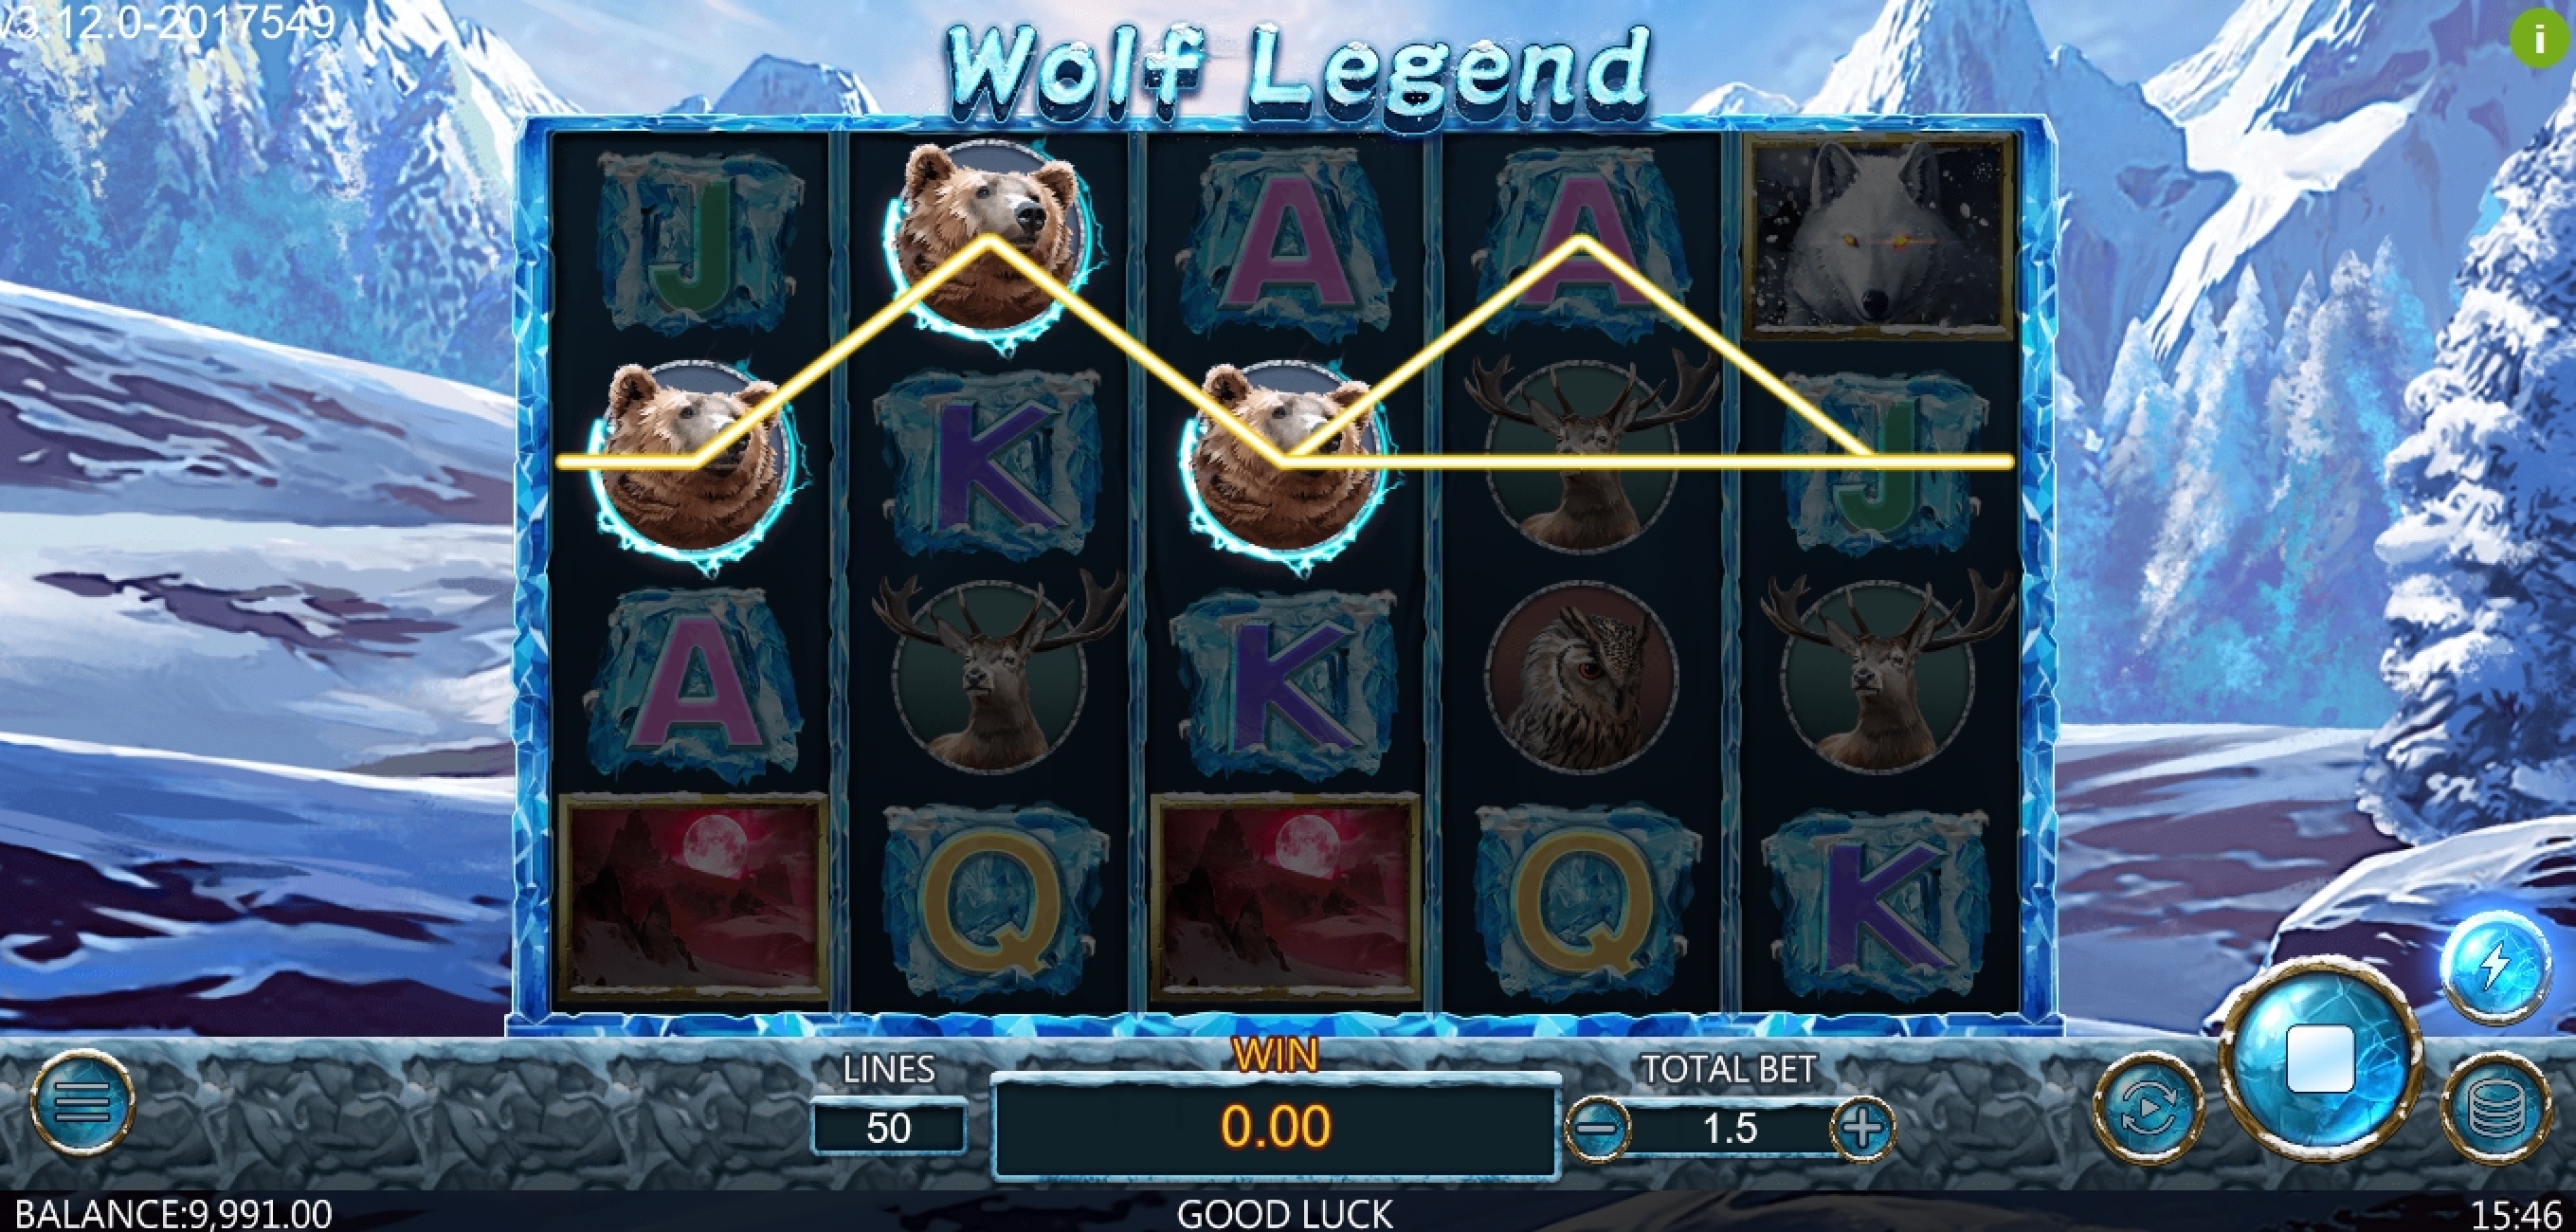 Win Money in Wolf Legend Free Slot Game by Dragoon Soft